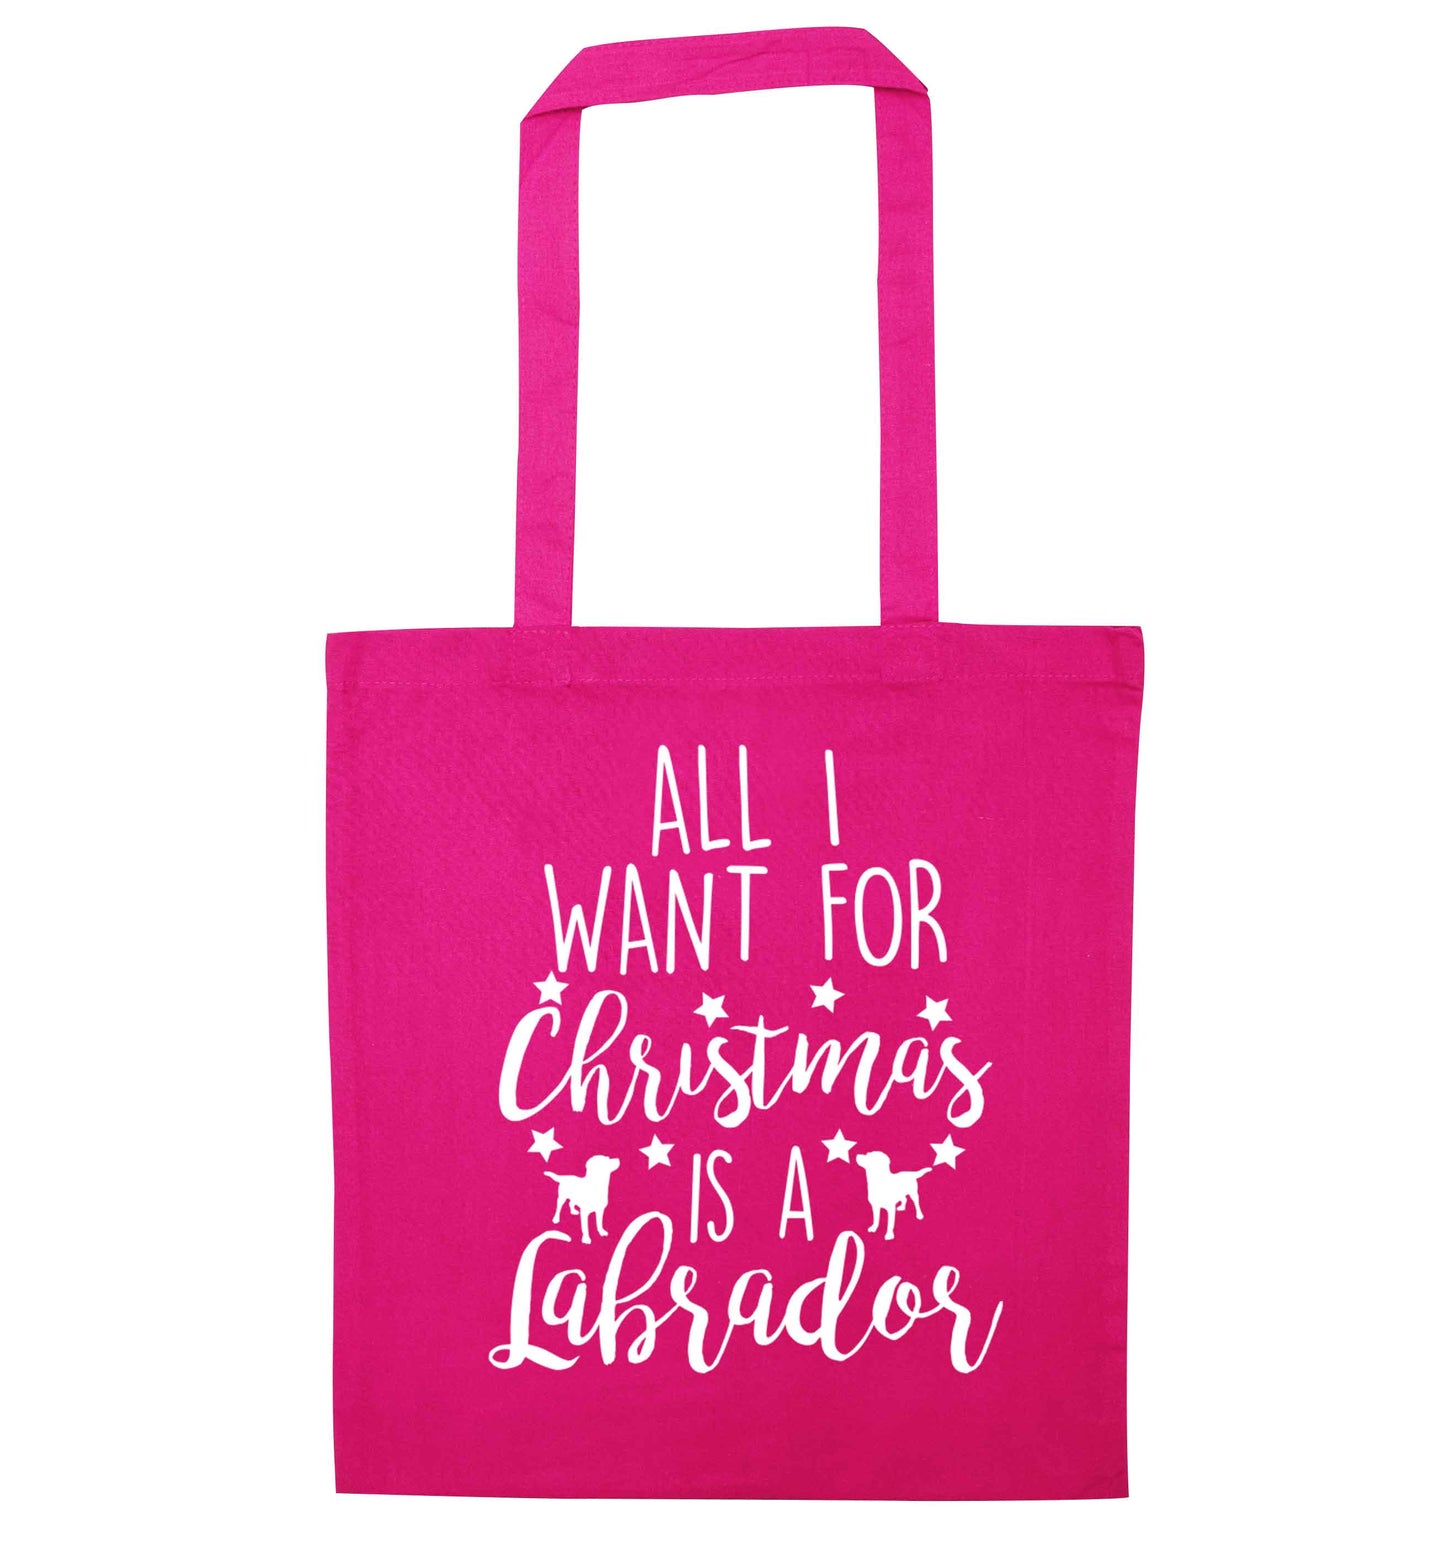 All I want for Christmas is a labrador pink tote bag